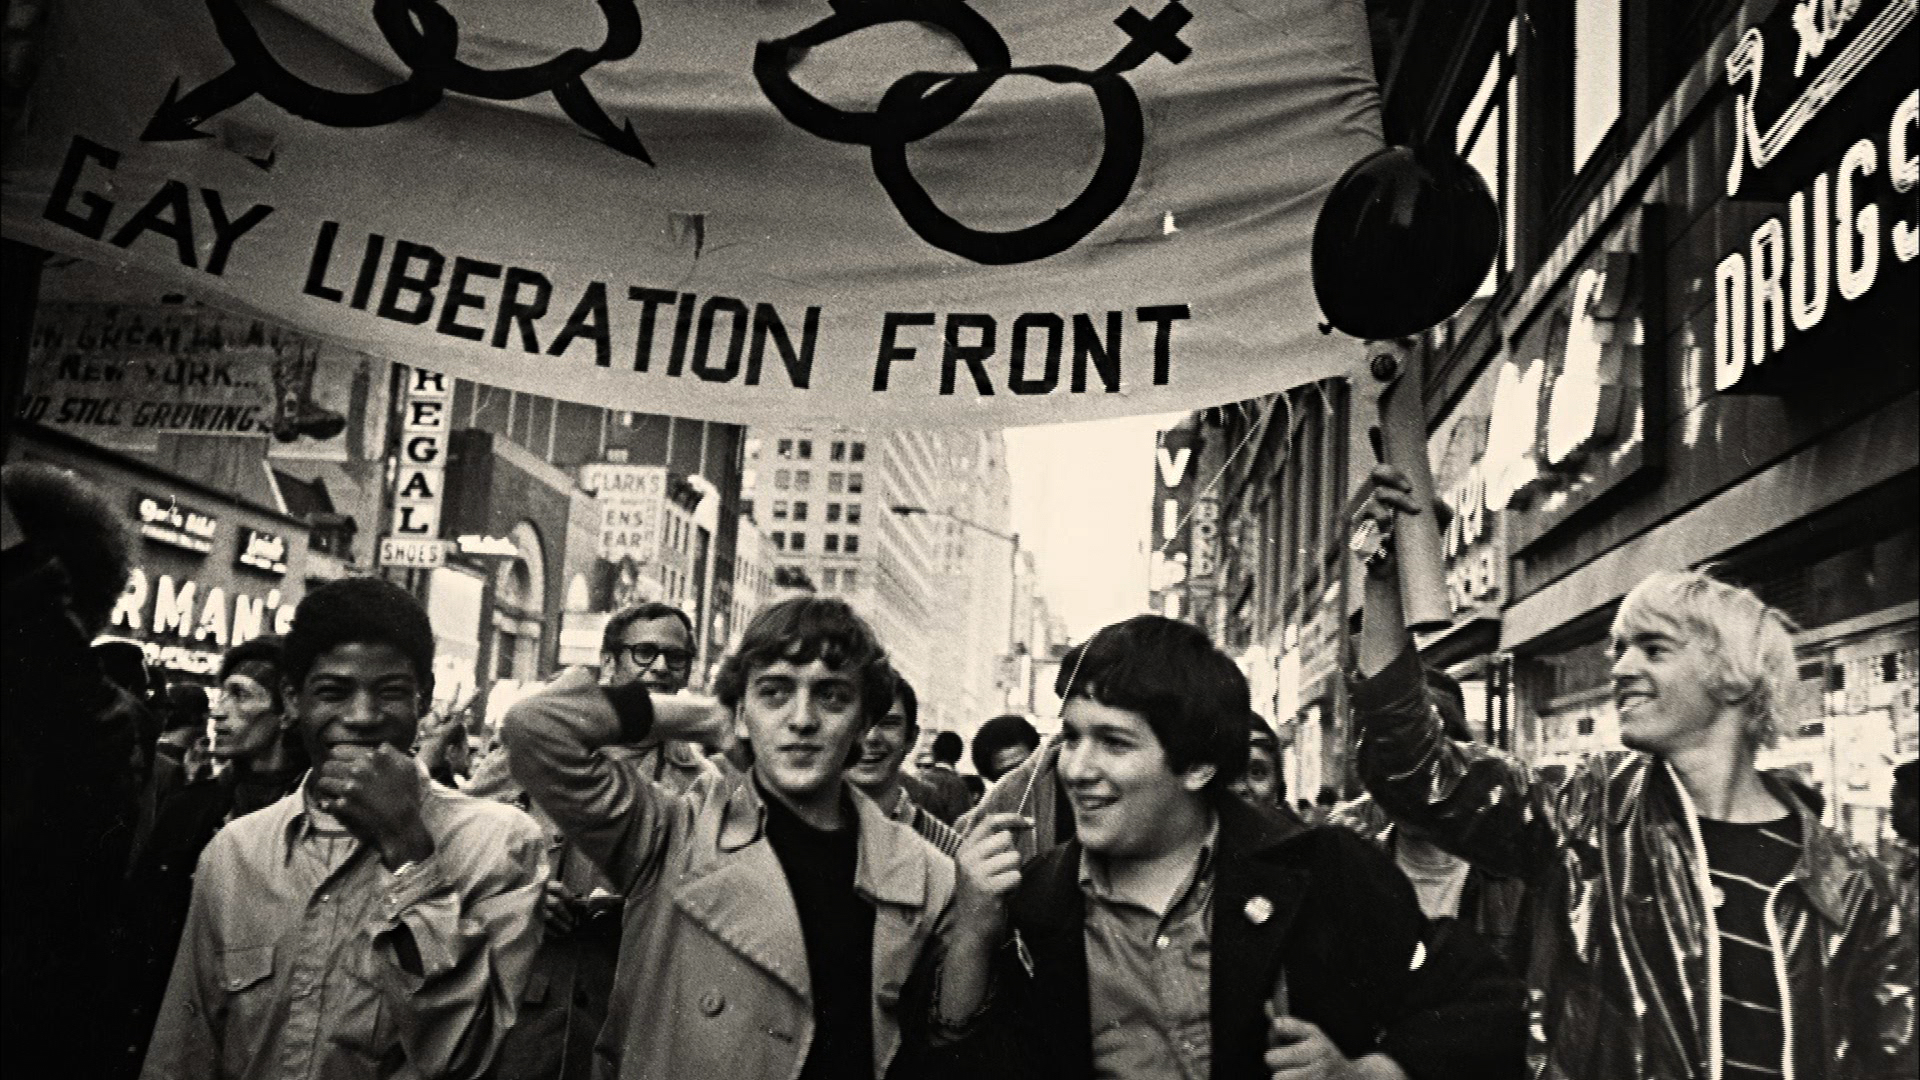 Video: The Legacy of the Stonewall Riots | Watch American Experience Online | PBS Video